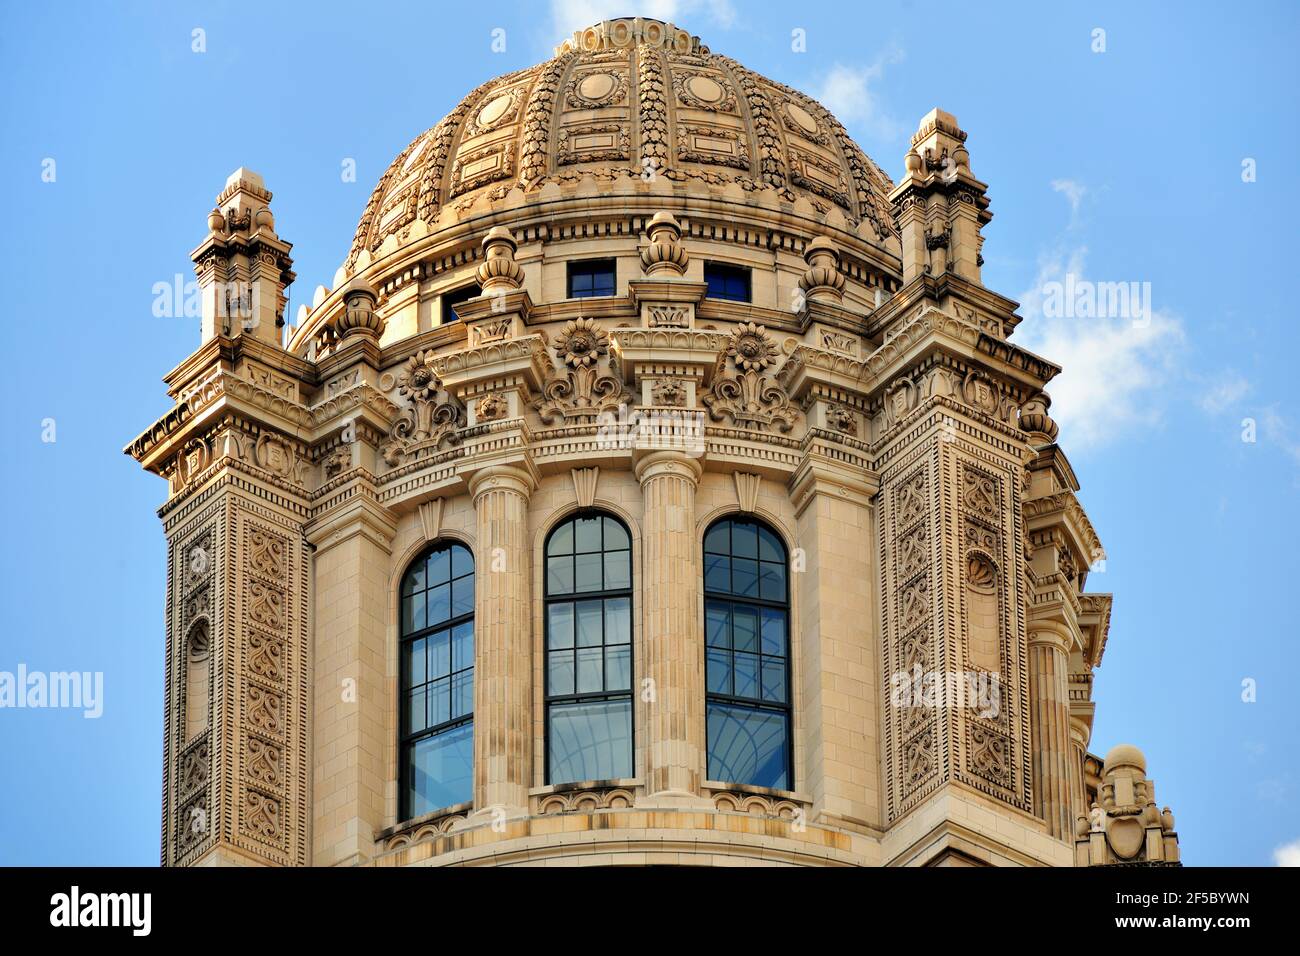 Chicago, Illinois, USA. A true architectural gem, the dome atop the 40-story 35 E. Wacker Drive Building. Stock Photo